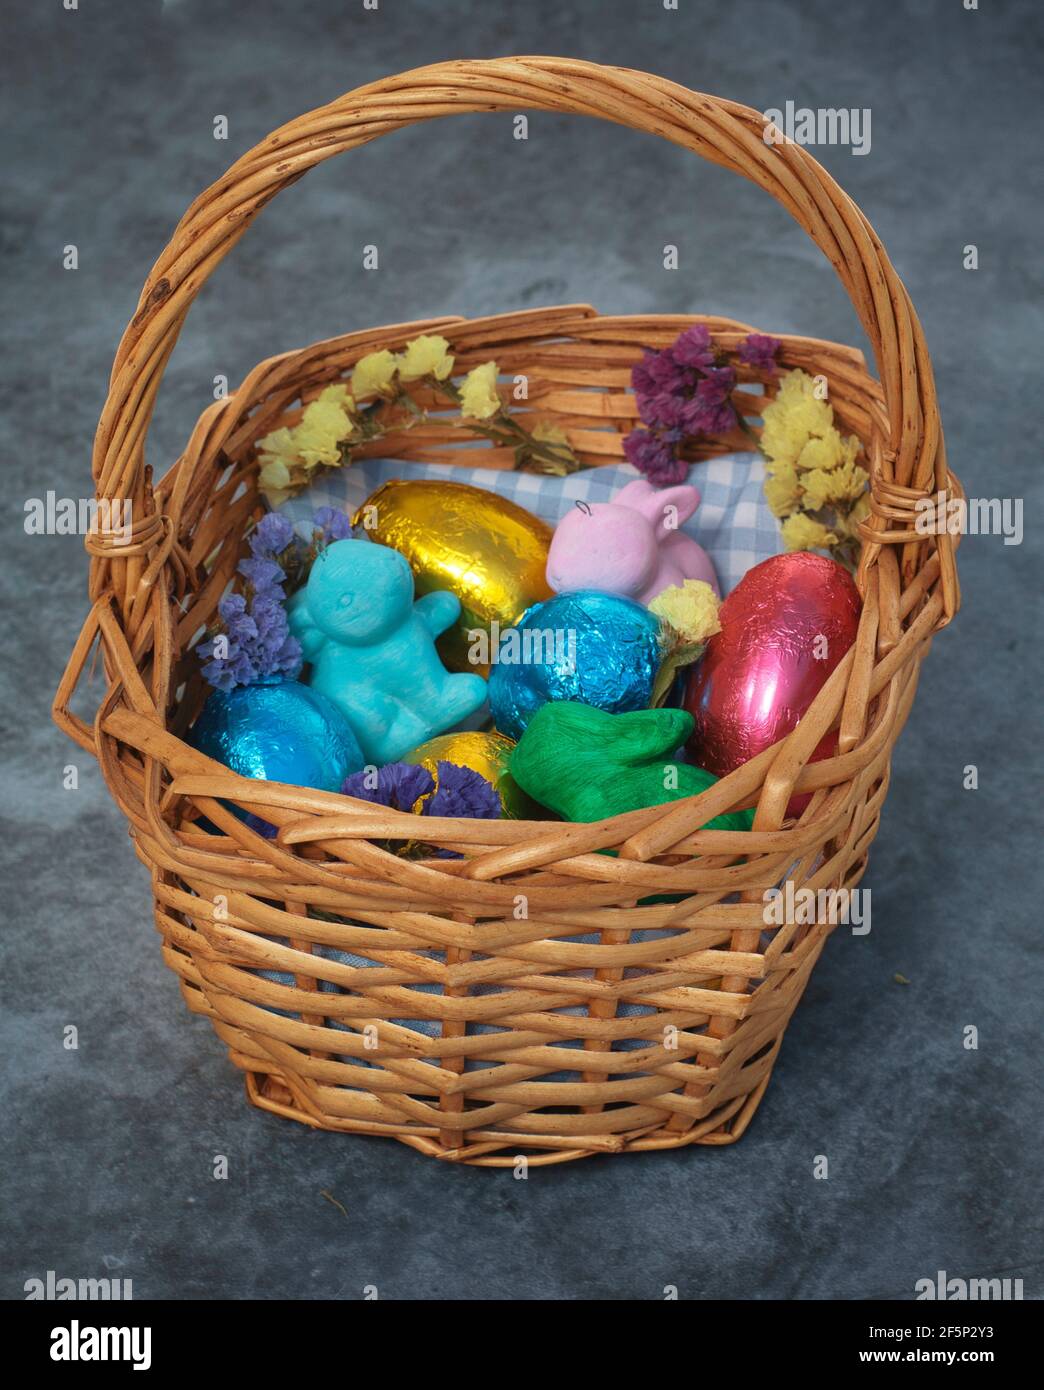 Basket with easter eggs in colored tin foil, bunnies and flowers. Stock Photo